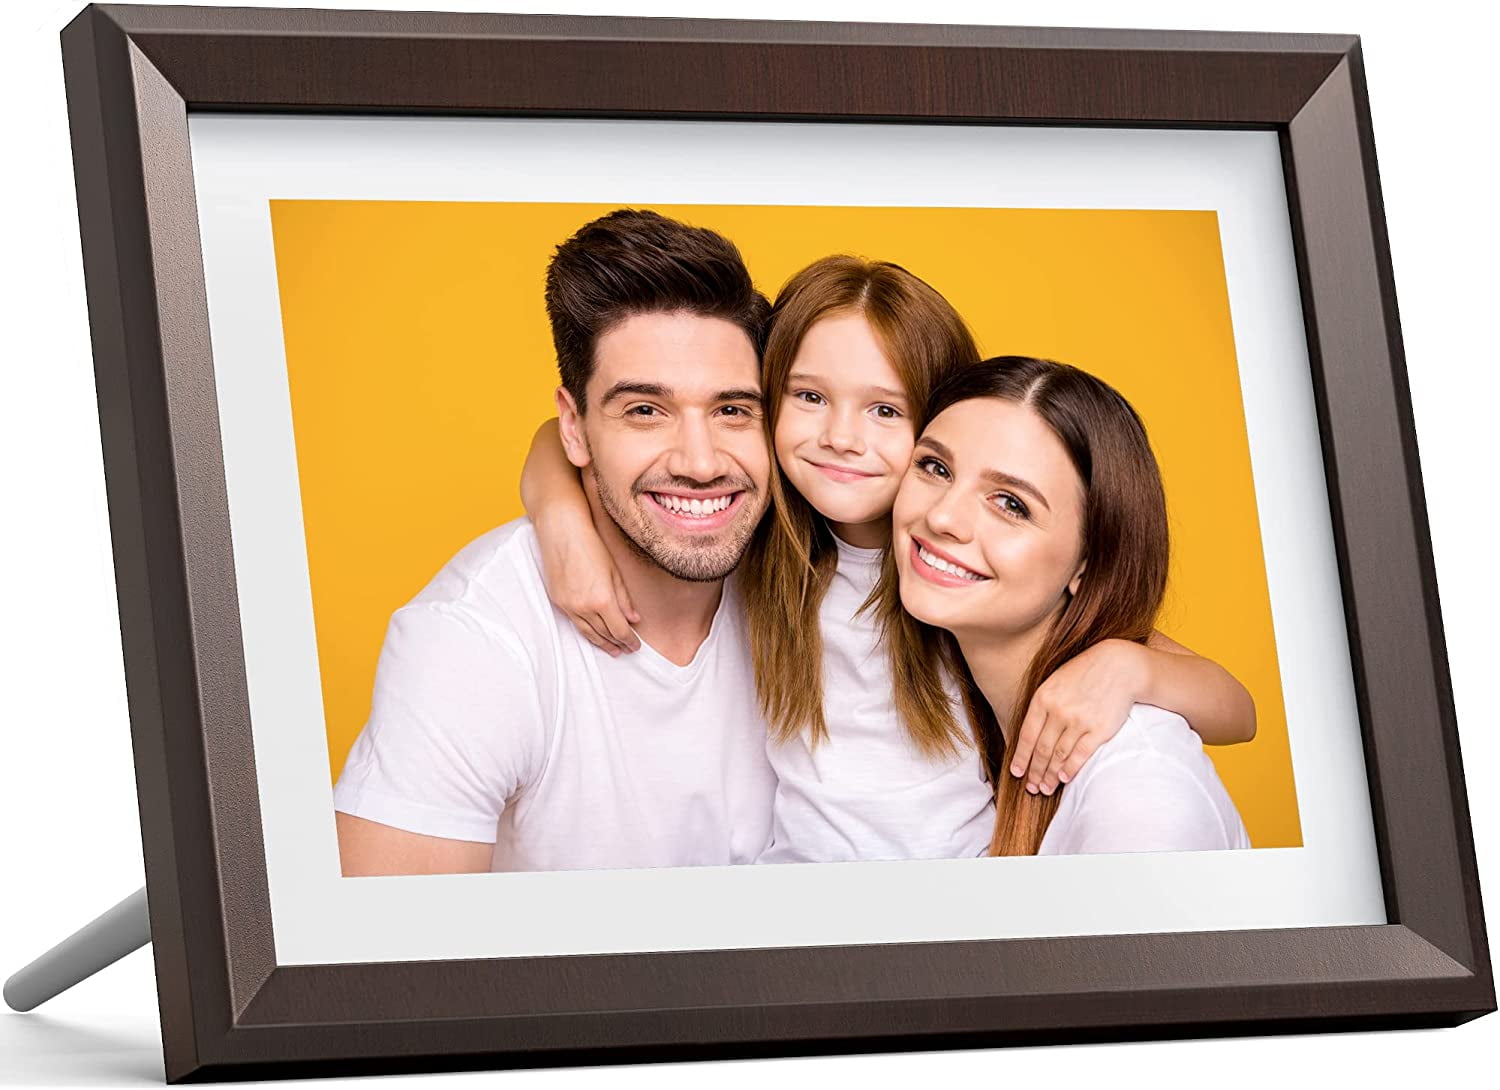 Dragon Touch Digital Picture Frame WiFi 10 inch IPS Touch Screen HD Display,  16GB Storage, Auto-Rotate, Share Photos via App, Email, Cloud Classic 10 